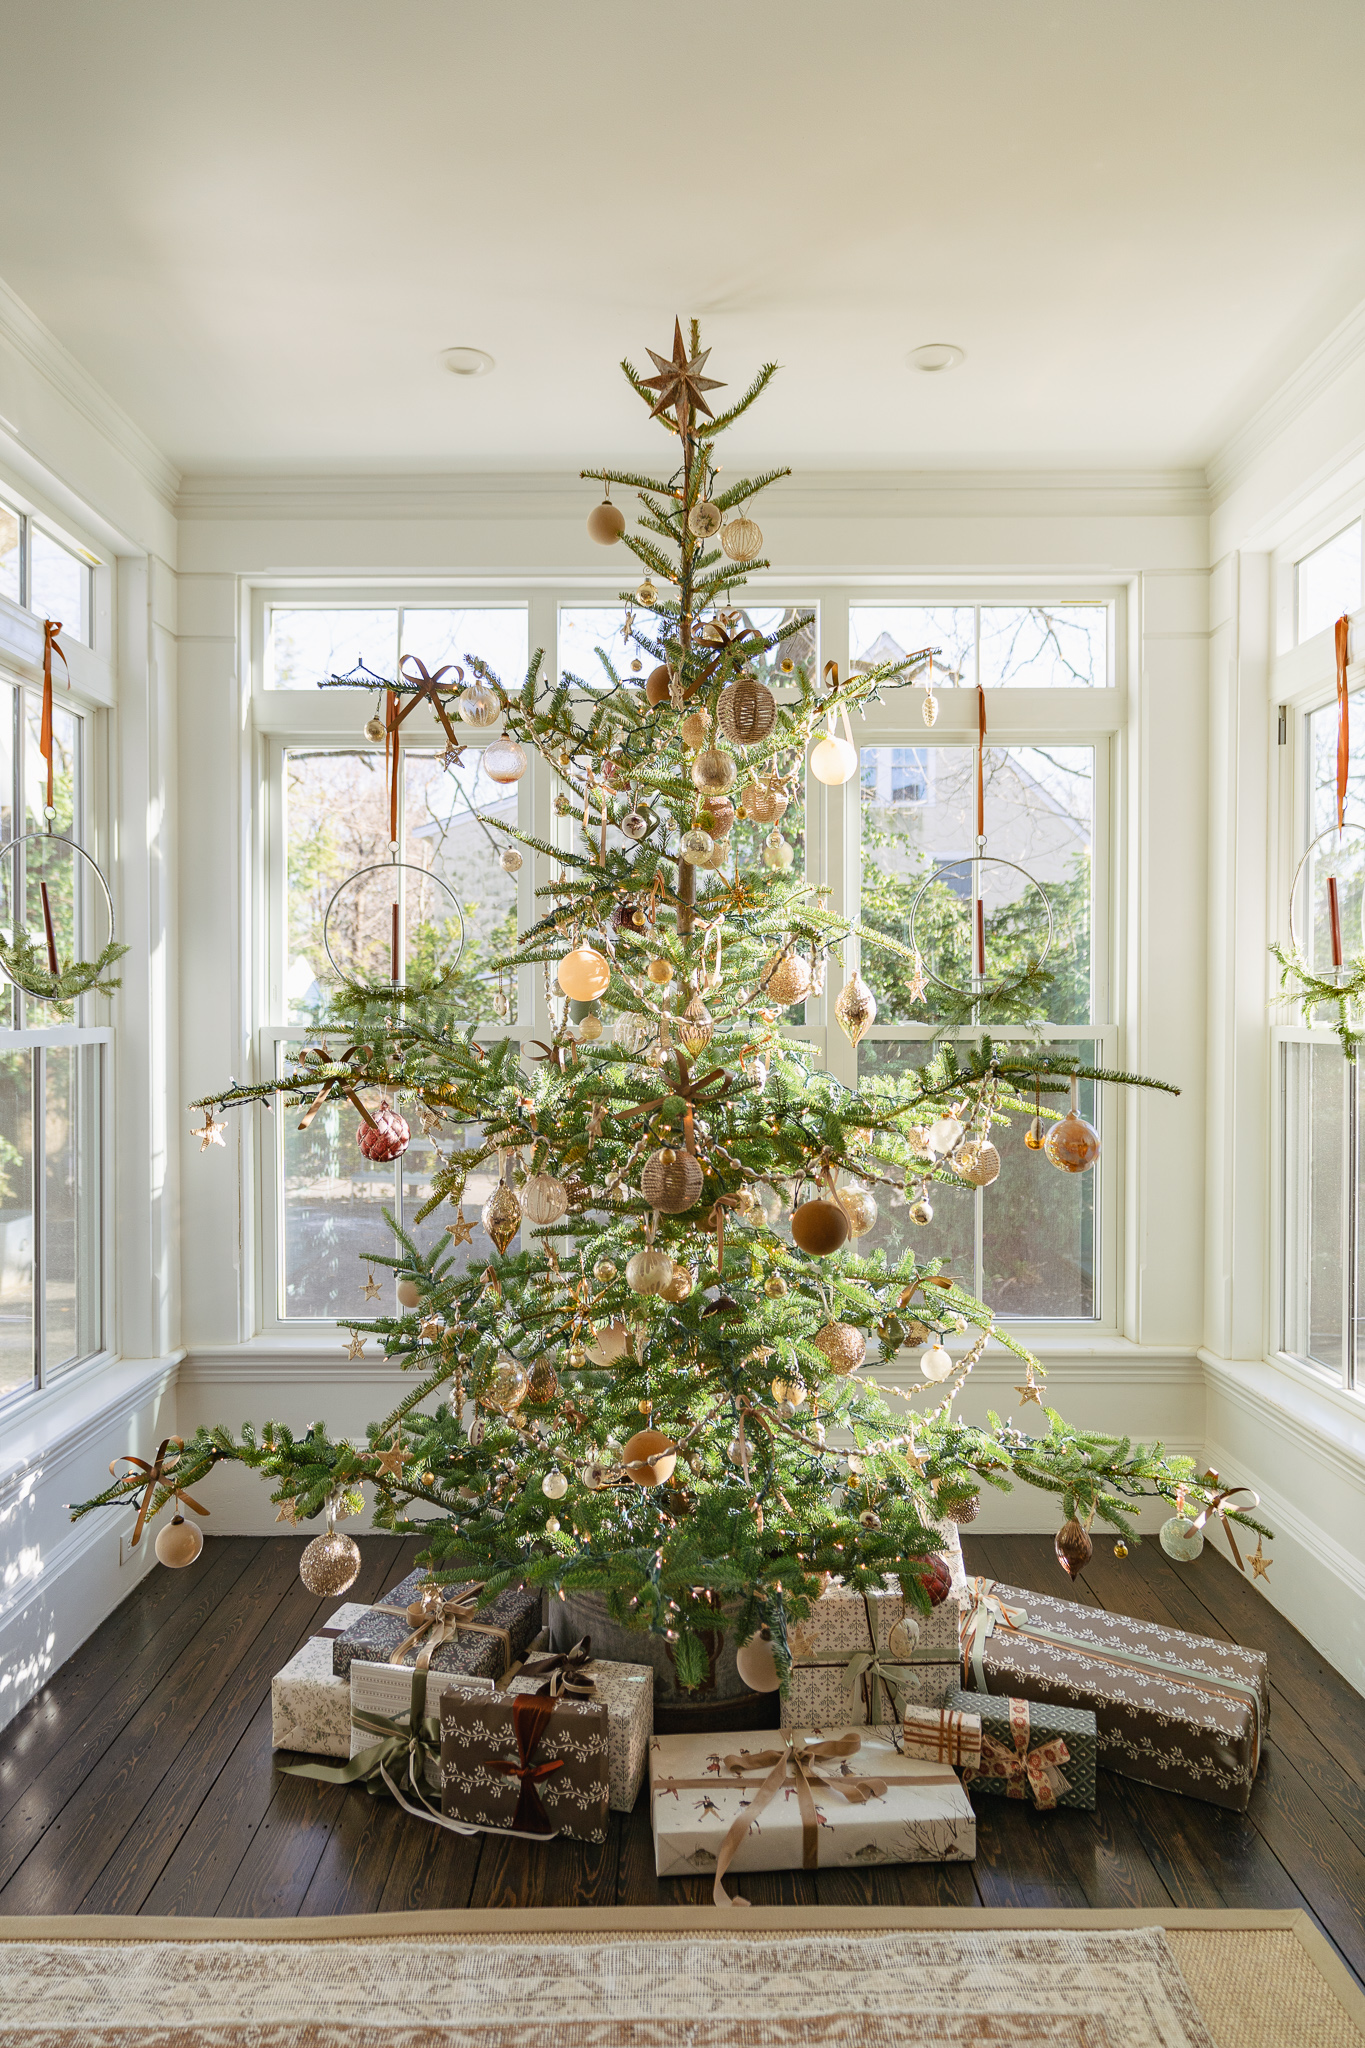 Eclectic Home Tour Finding Lovely Christmas - love this wild real tree with vintage ornaments